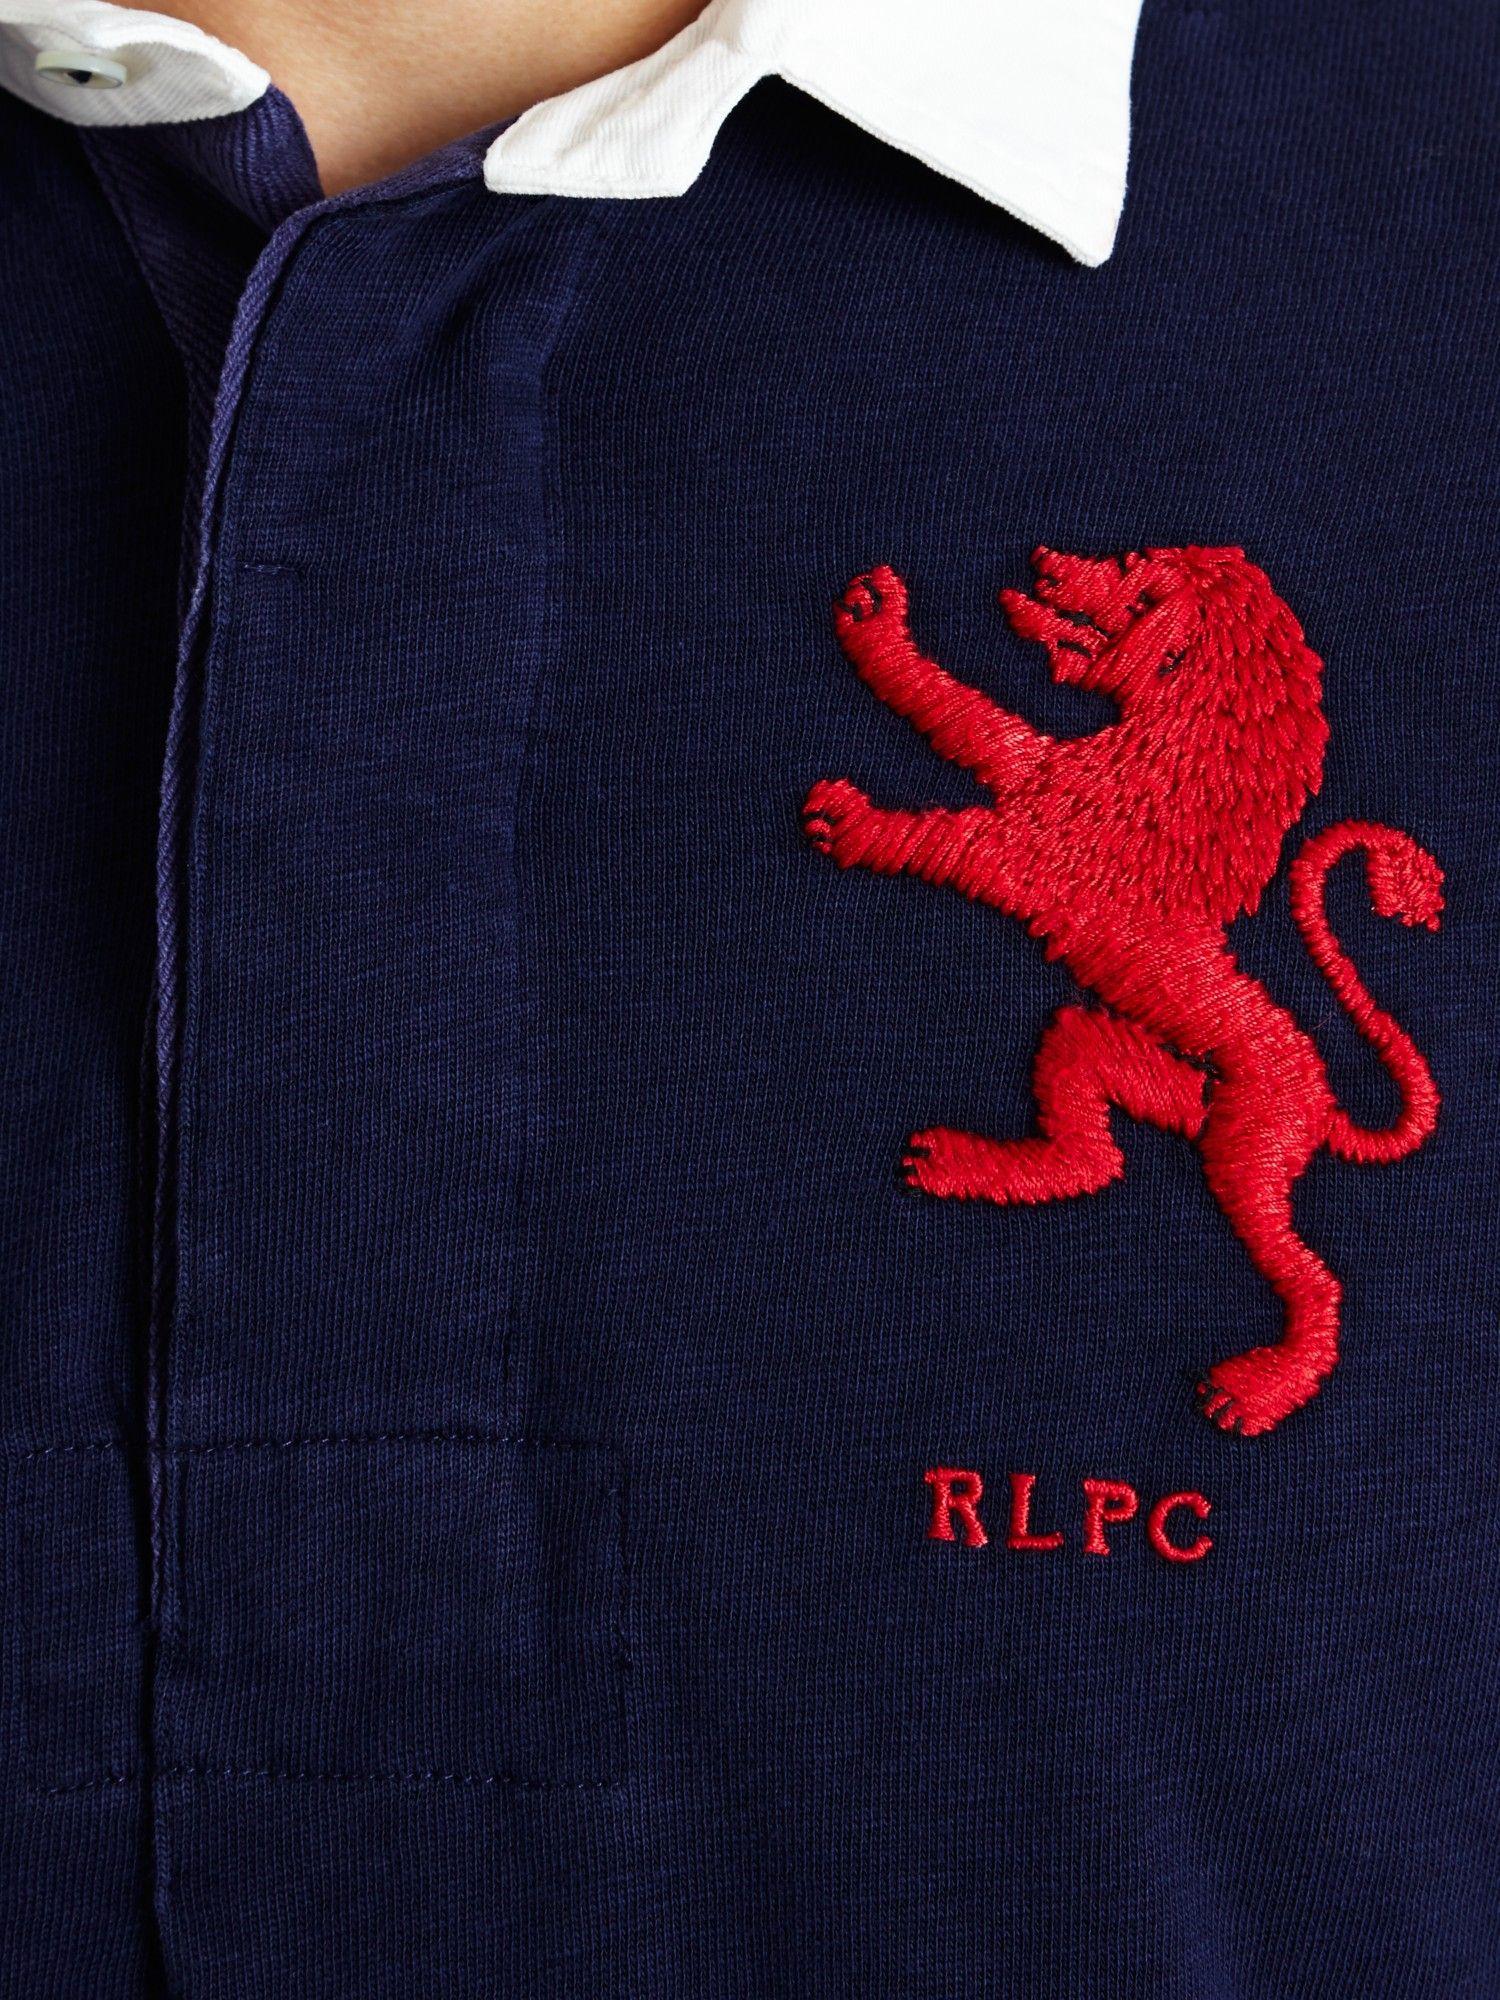 Red and Blue Lion Logo - Polo Ralph Lauren Lion Rugby Jersey Top in Blue for Men - Lyst